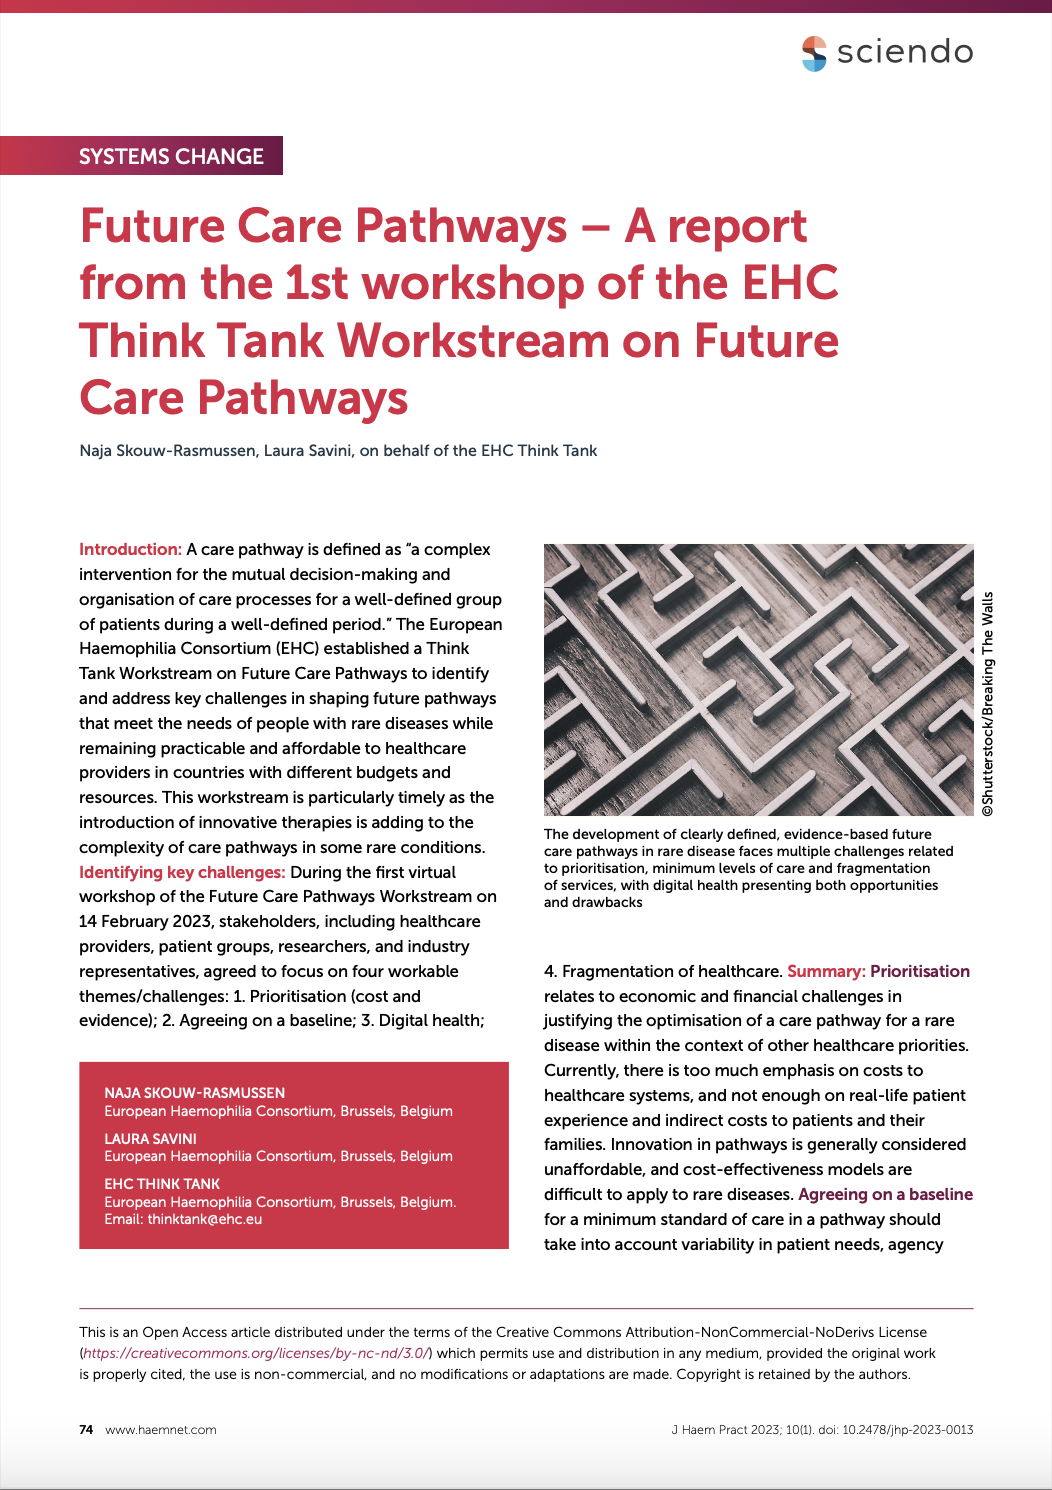 Just published! Report from the 1st workshop of the Future Care Pathways workstream